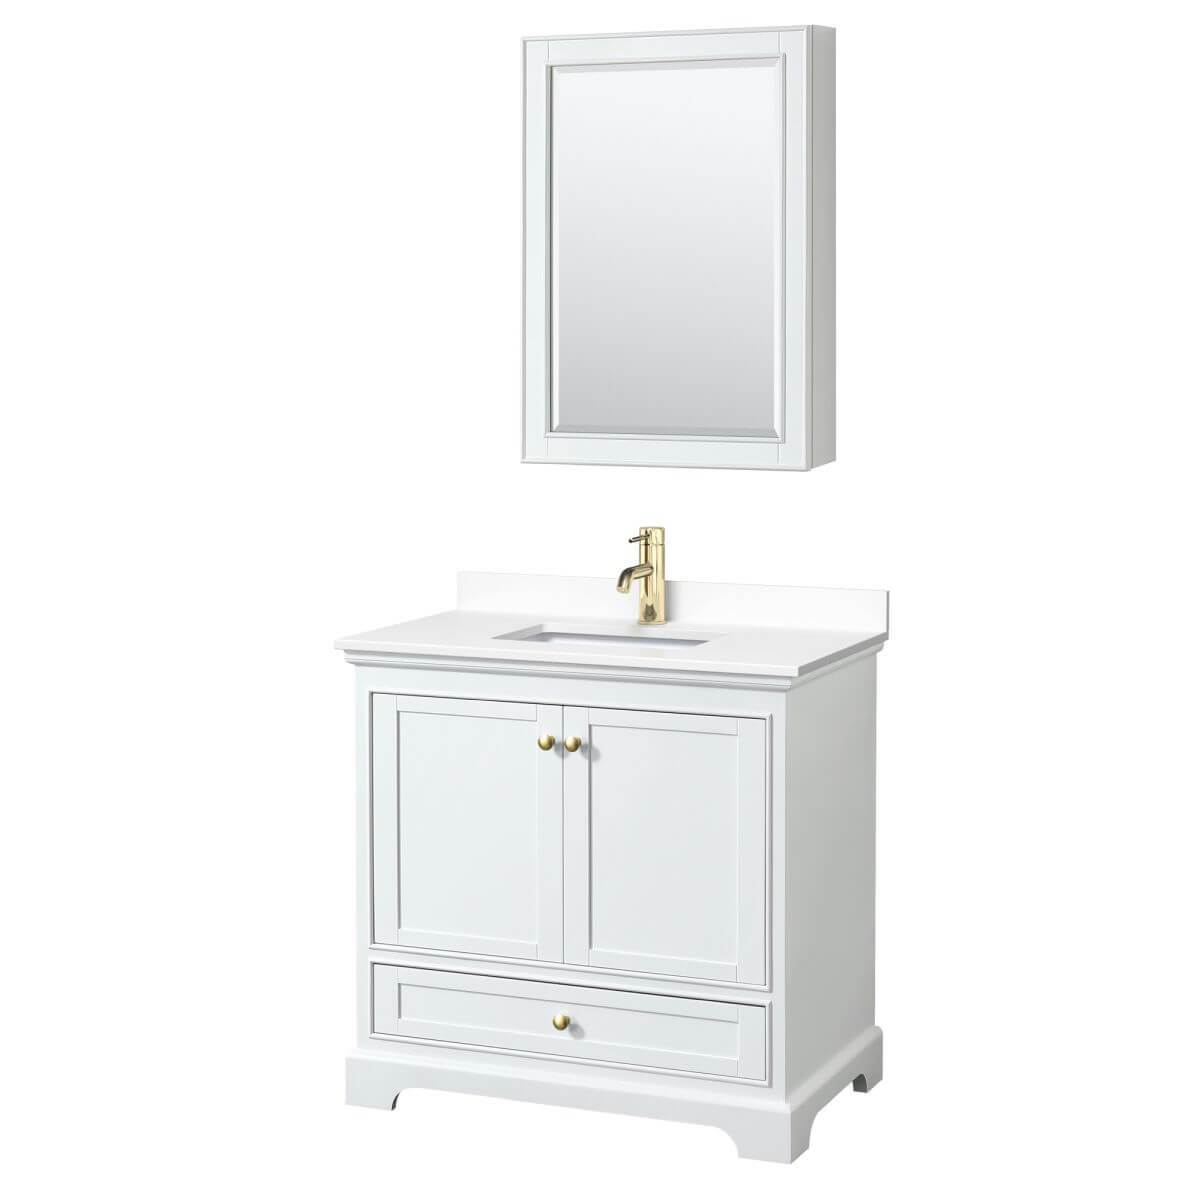 Wyndham Collection Deborah 36 inch Single Bathroom Vanity in White with White Cultured Marble Countertop, Undermount Square Sink, Brushed Gold Trim and Medicine Cabinet - WCS202036SWGWCUNSMED